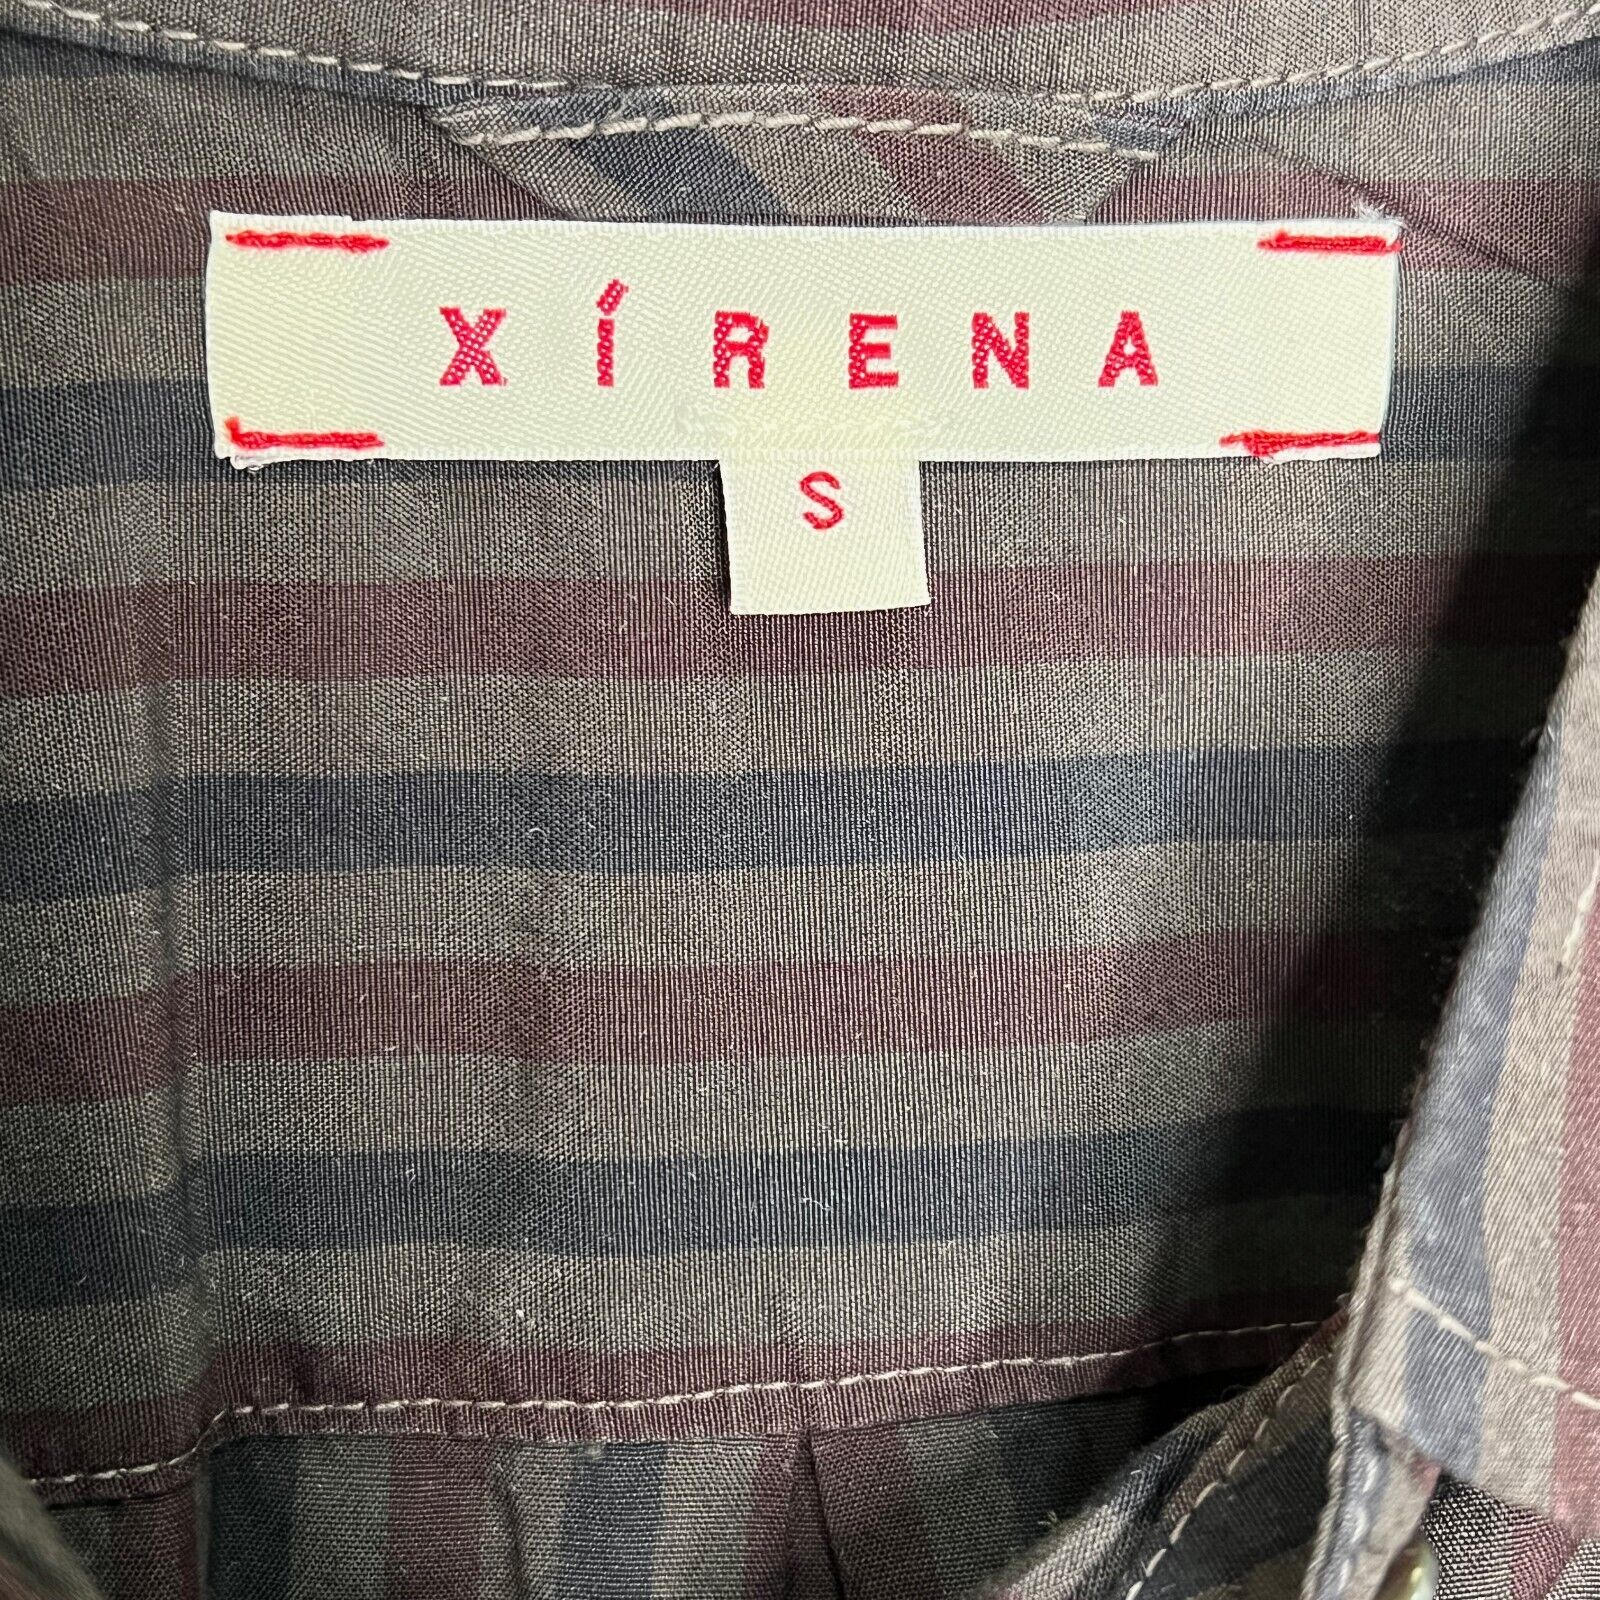 Xirena Womens Gray Long Sleeve Striped Cotton Button Up Shirt Top Size Small